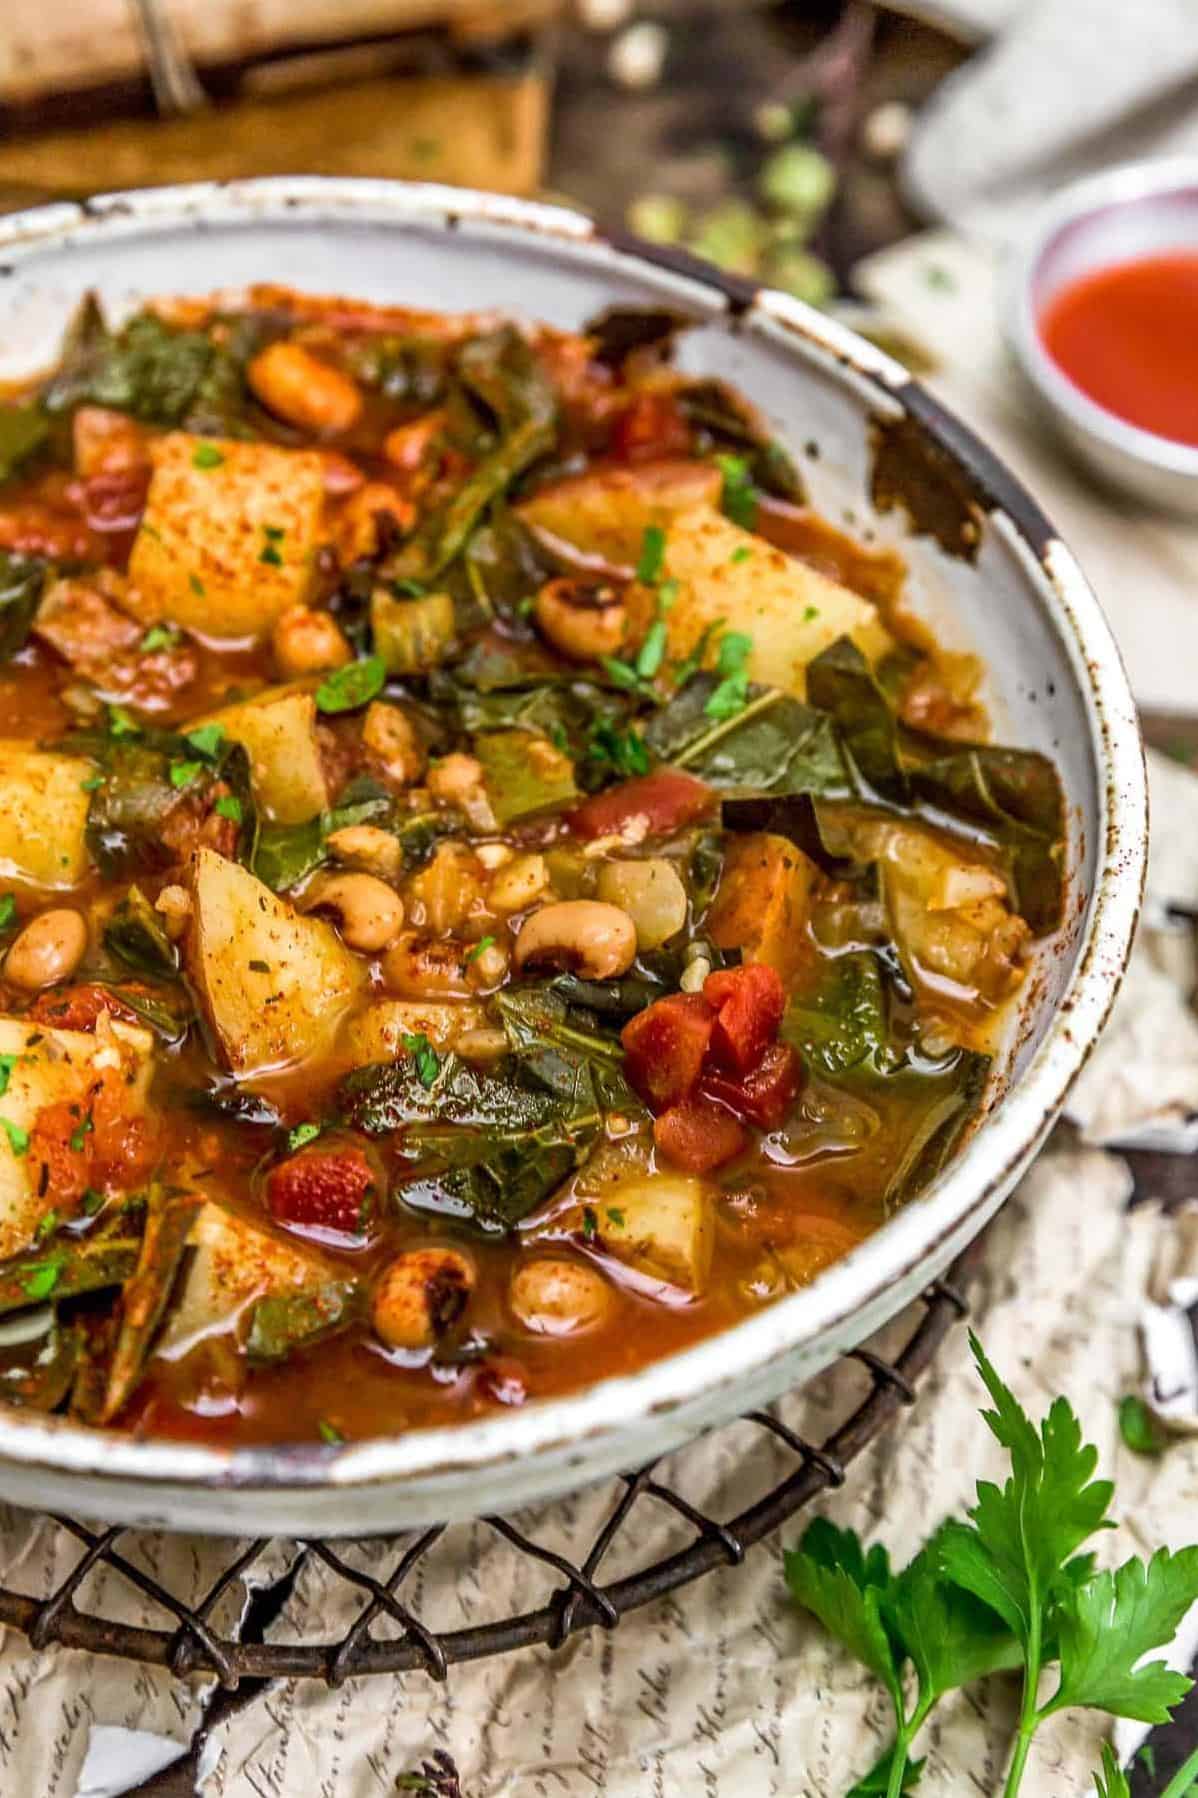  Warm up your soul with a bowl of this delicious and healthy stew